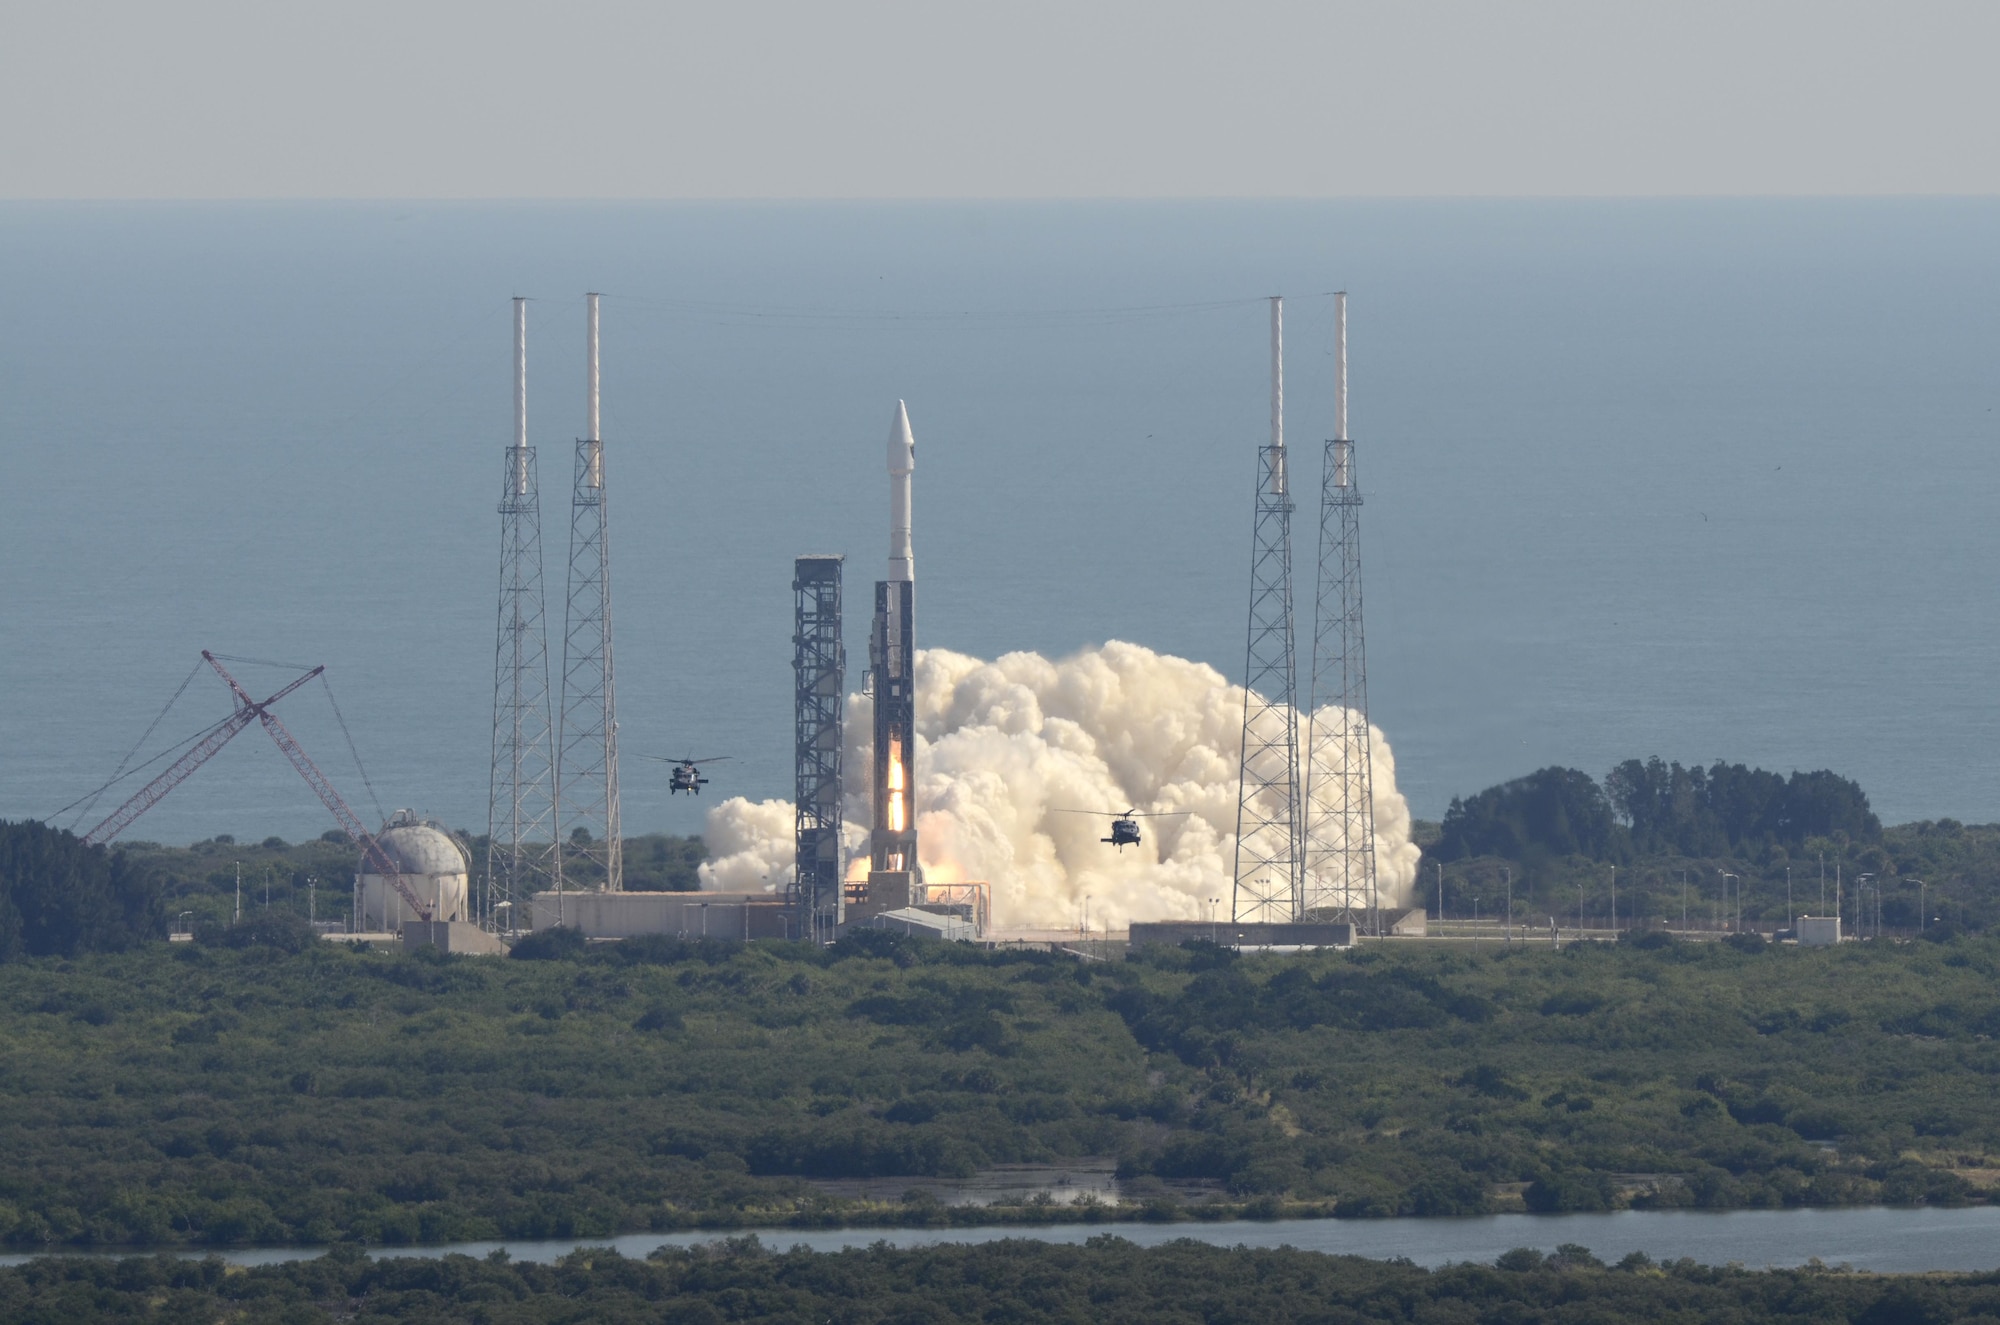 Wing reservists provided range-clearance and contingency support for the successful launch of a SpaceX Falcon 9 ABS/Eutelsat-2 launch June 15 at 10:29 a.m. from Launch Complex 40 at nearby Cape Canaveral Air Force Station. (U.S. Air Force photo/Maj. Cathleen Snow)